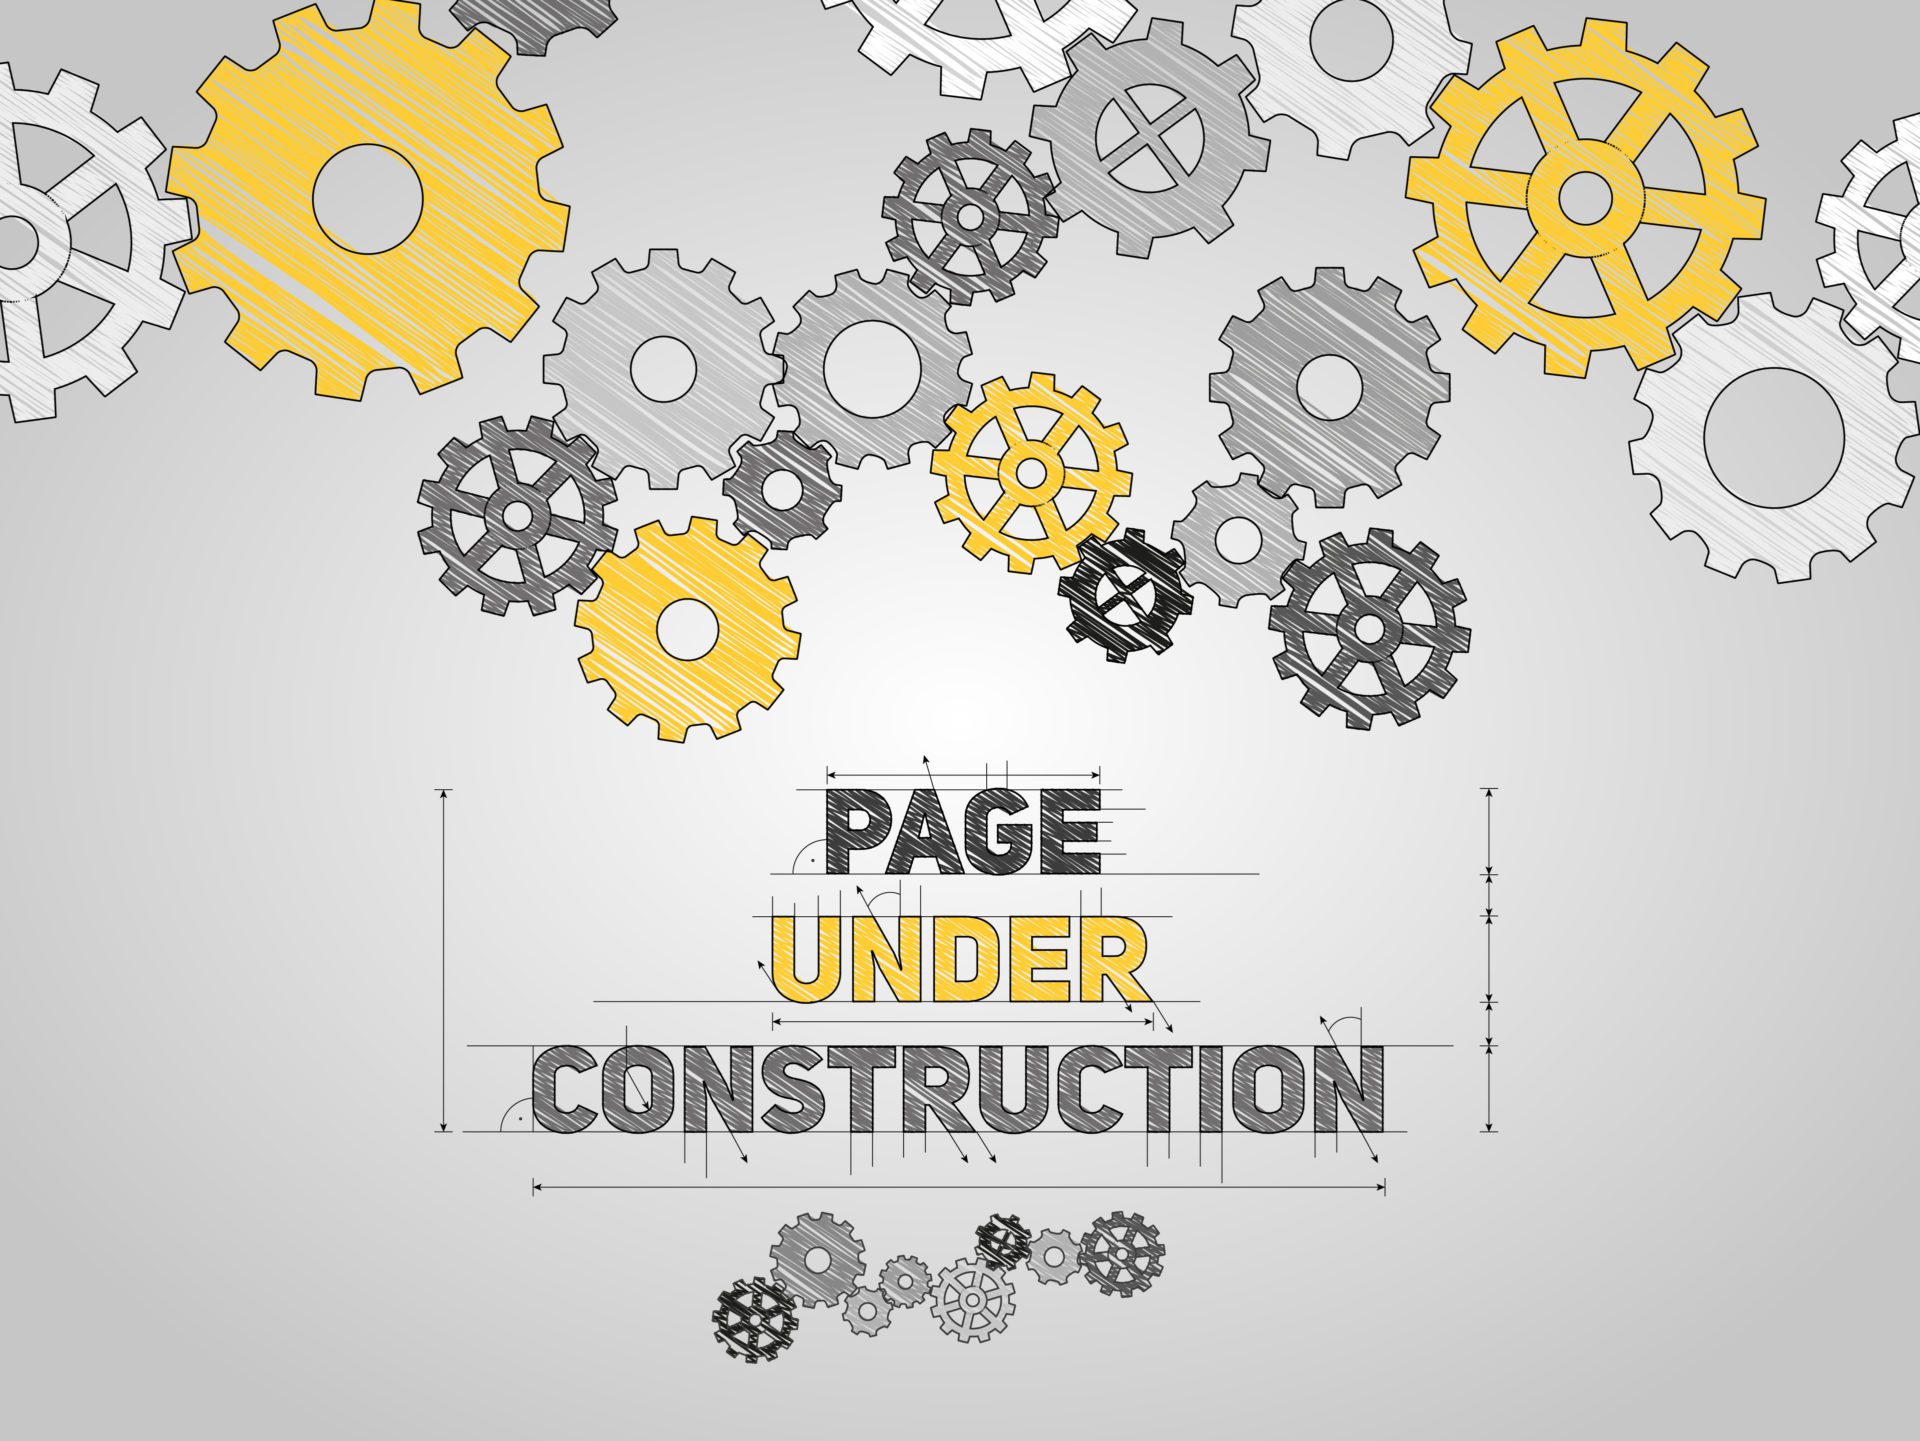 Under Construction infographic